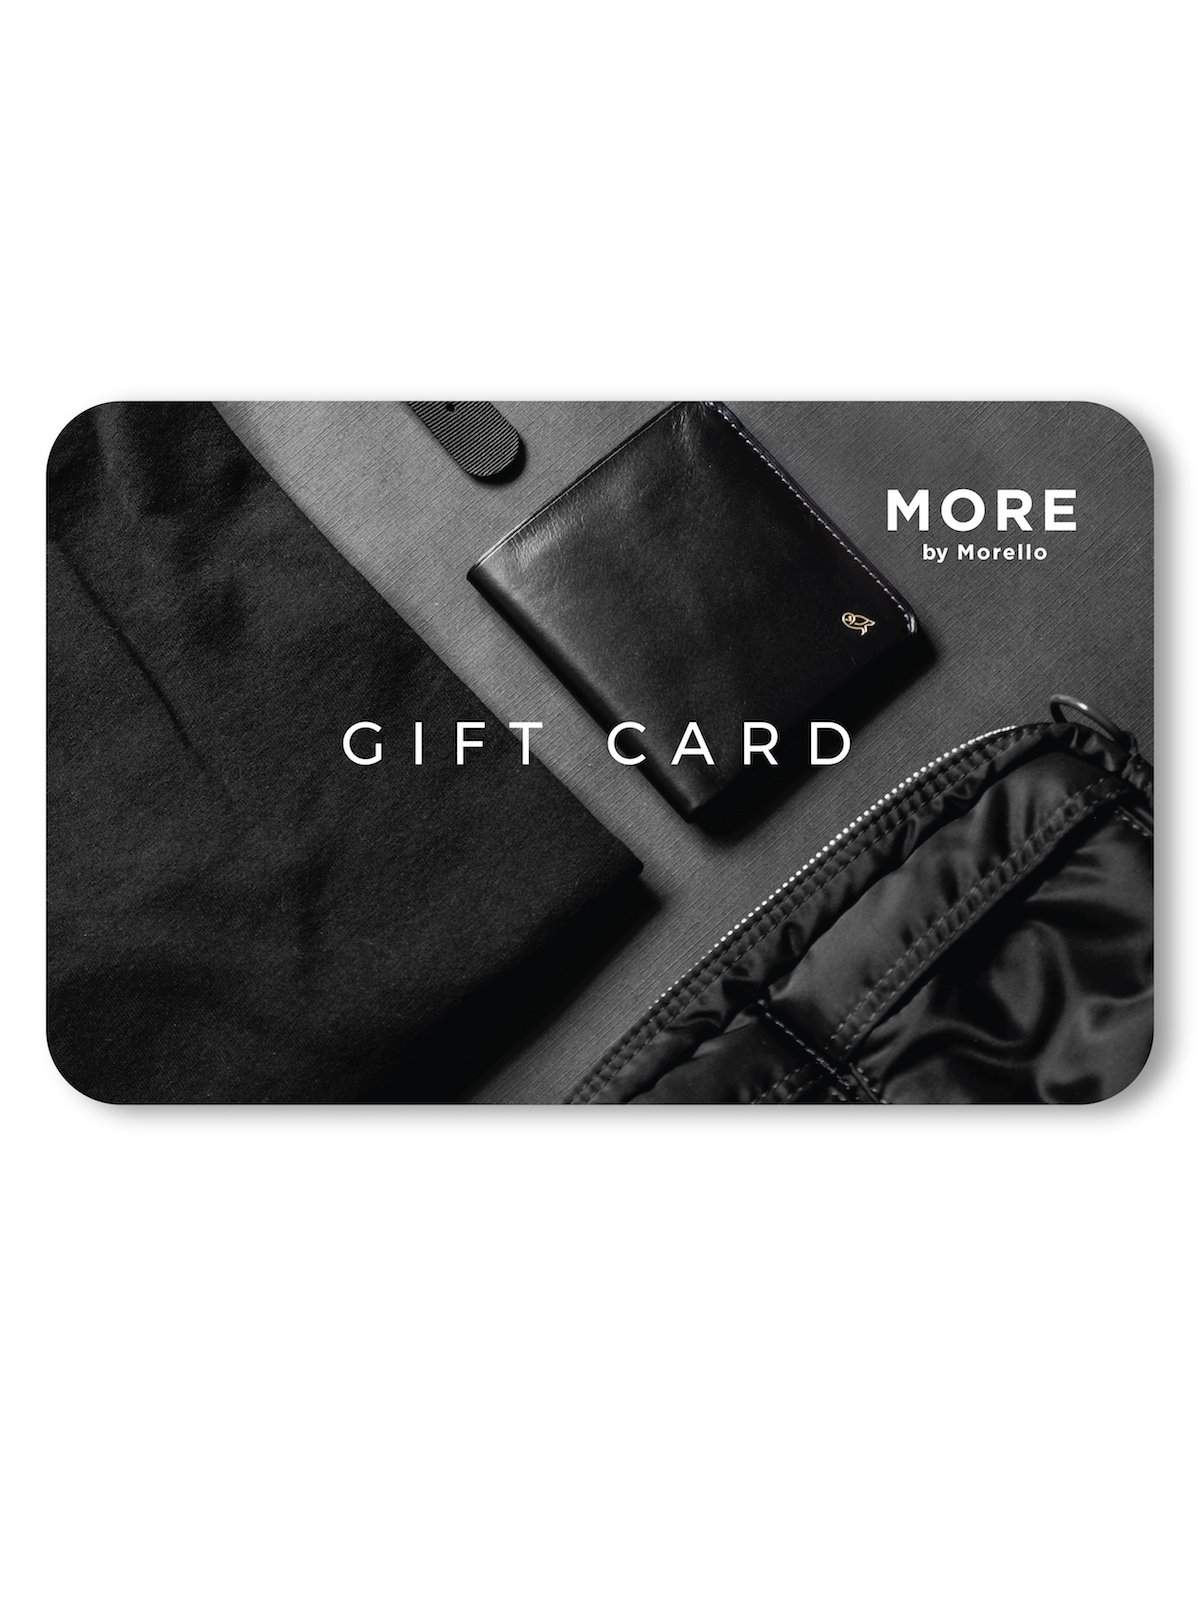 Gift Card - MORE by Morello Indonesia